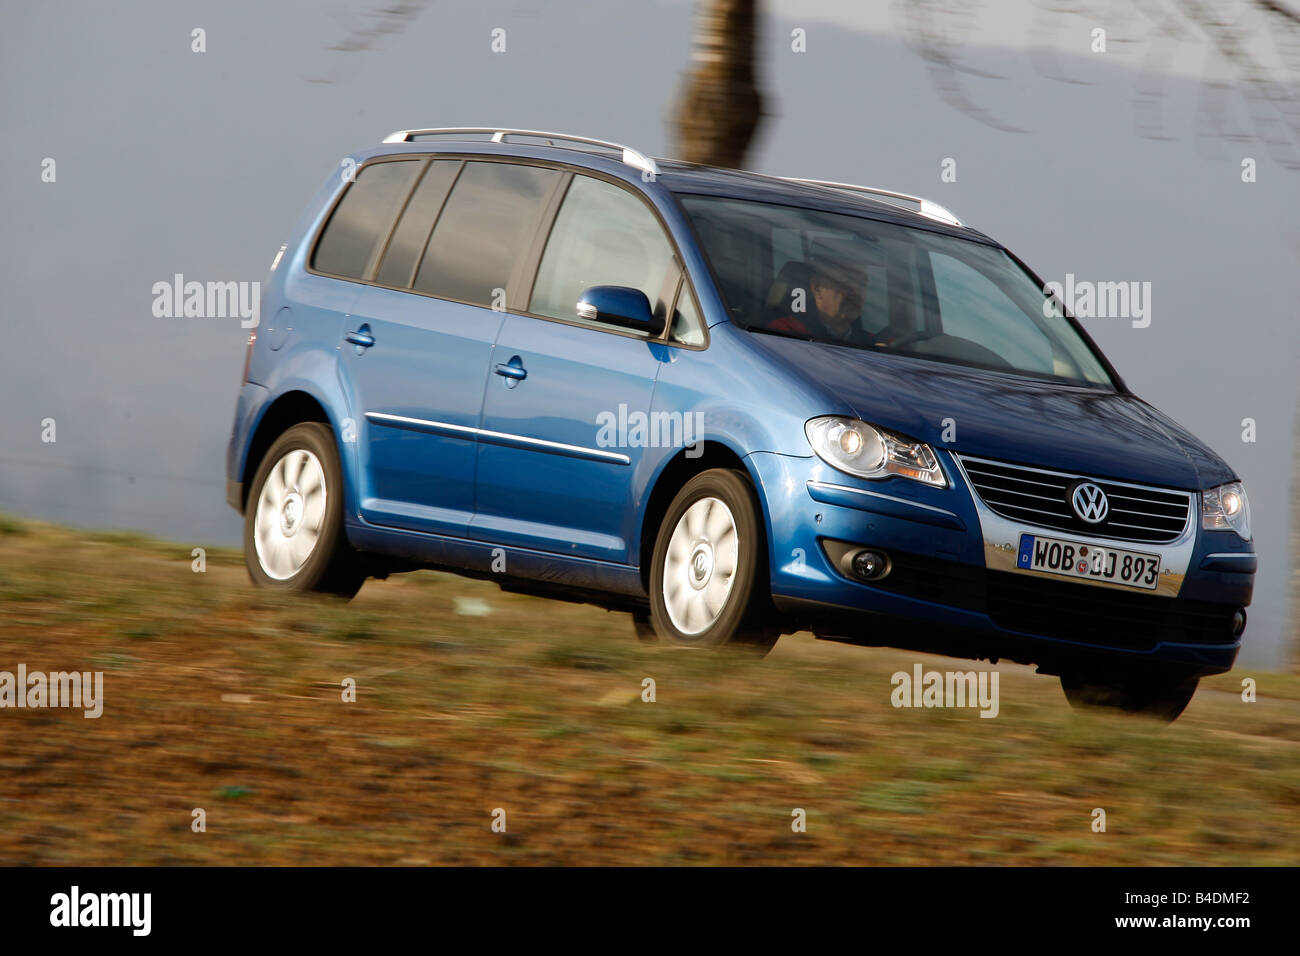 VW Volkswagen Touran 2.0 TDI Highline, model year 2007-, blue diagonal from the front, frontal view, road Stock Photo - Alamy